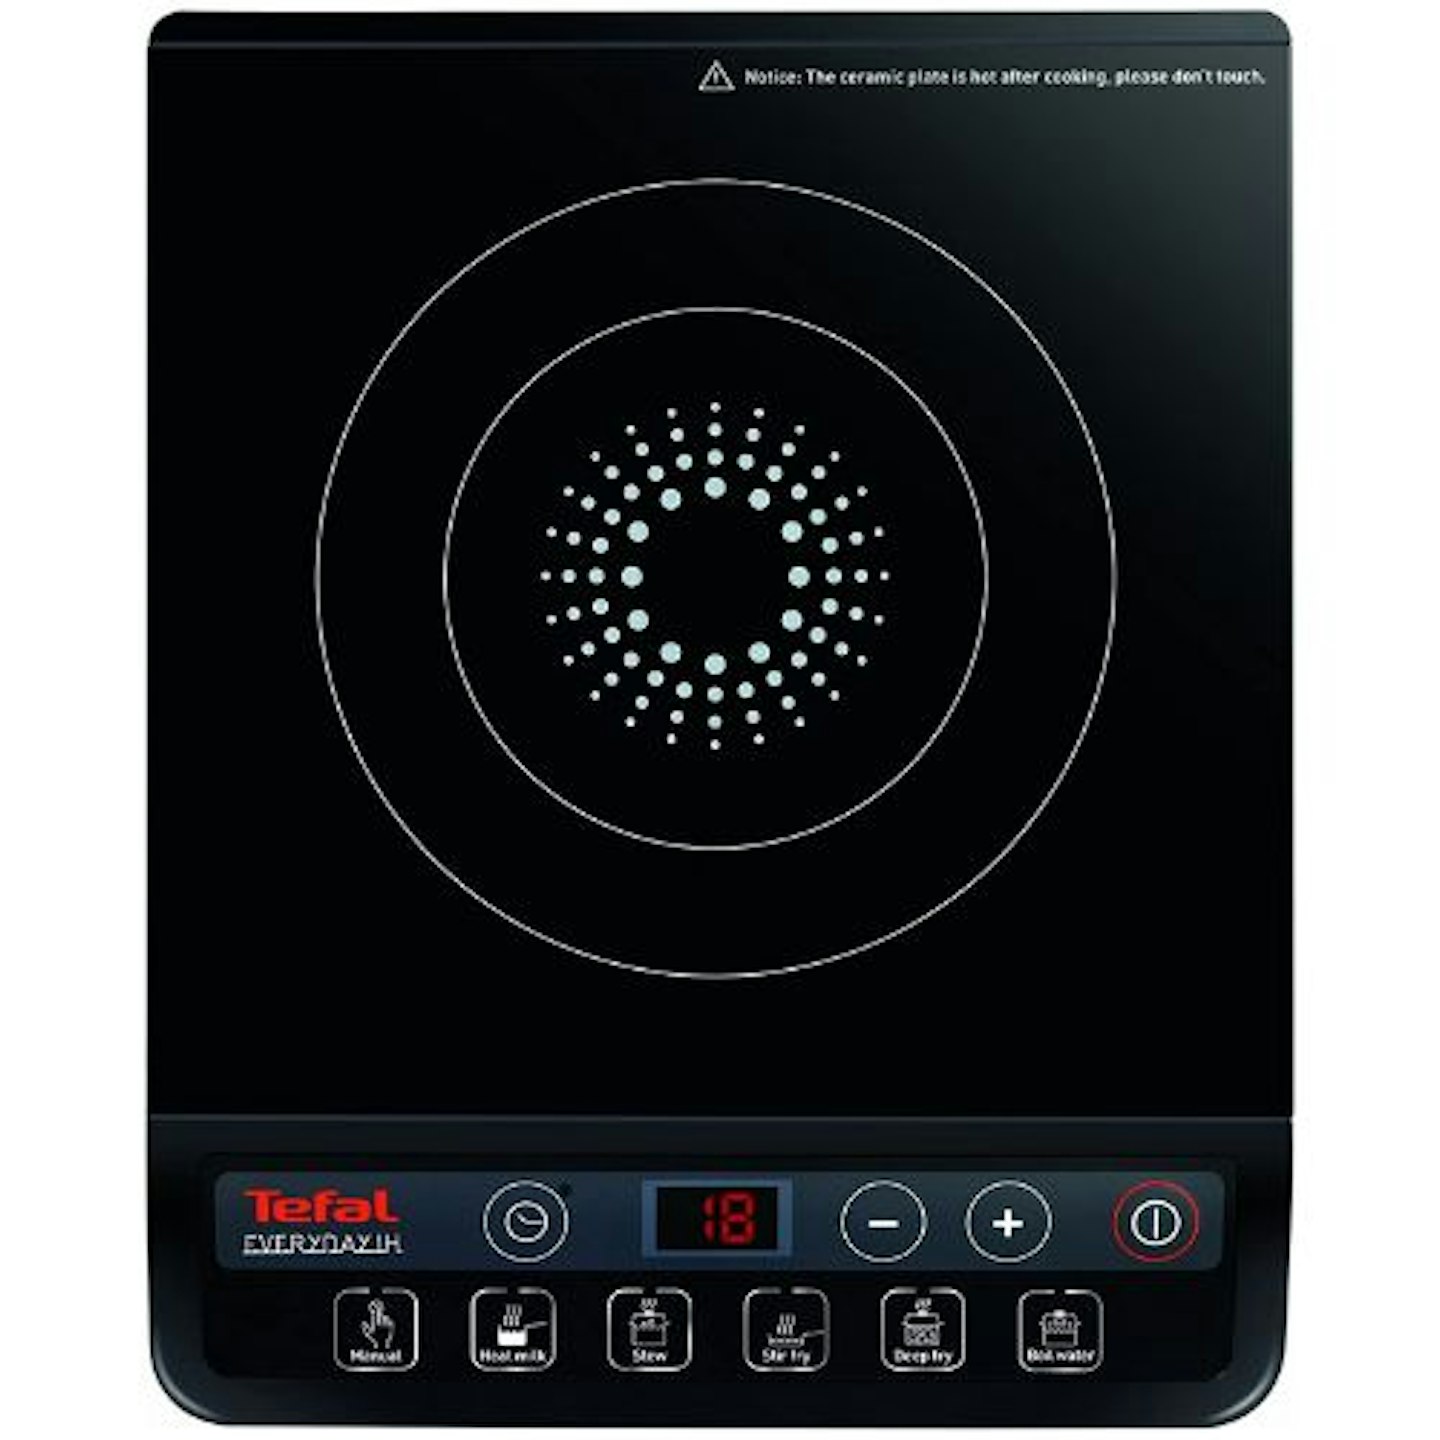 Tefal Everyday Induction Portable Hob